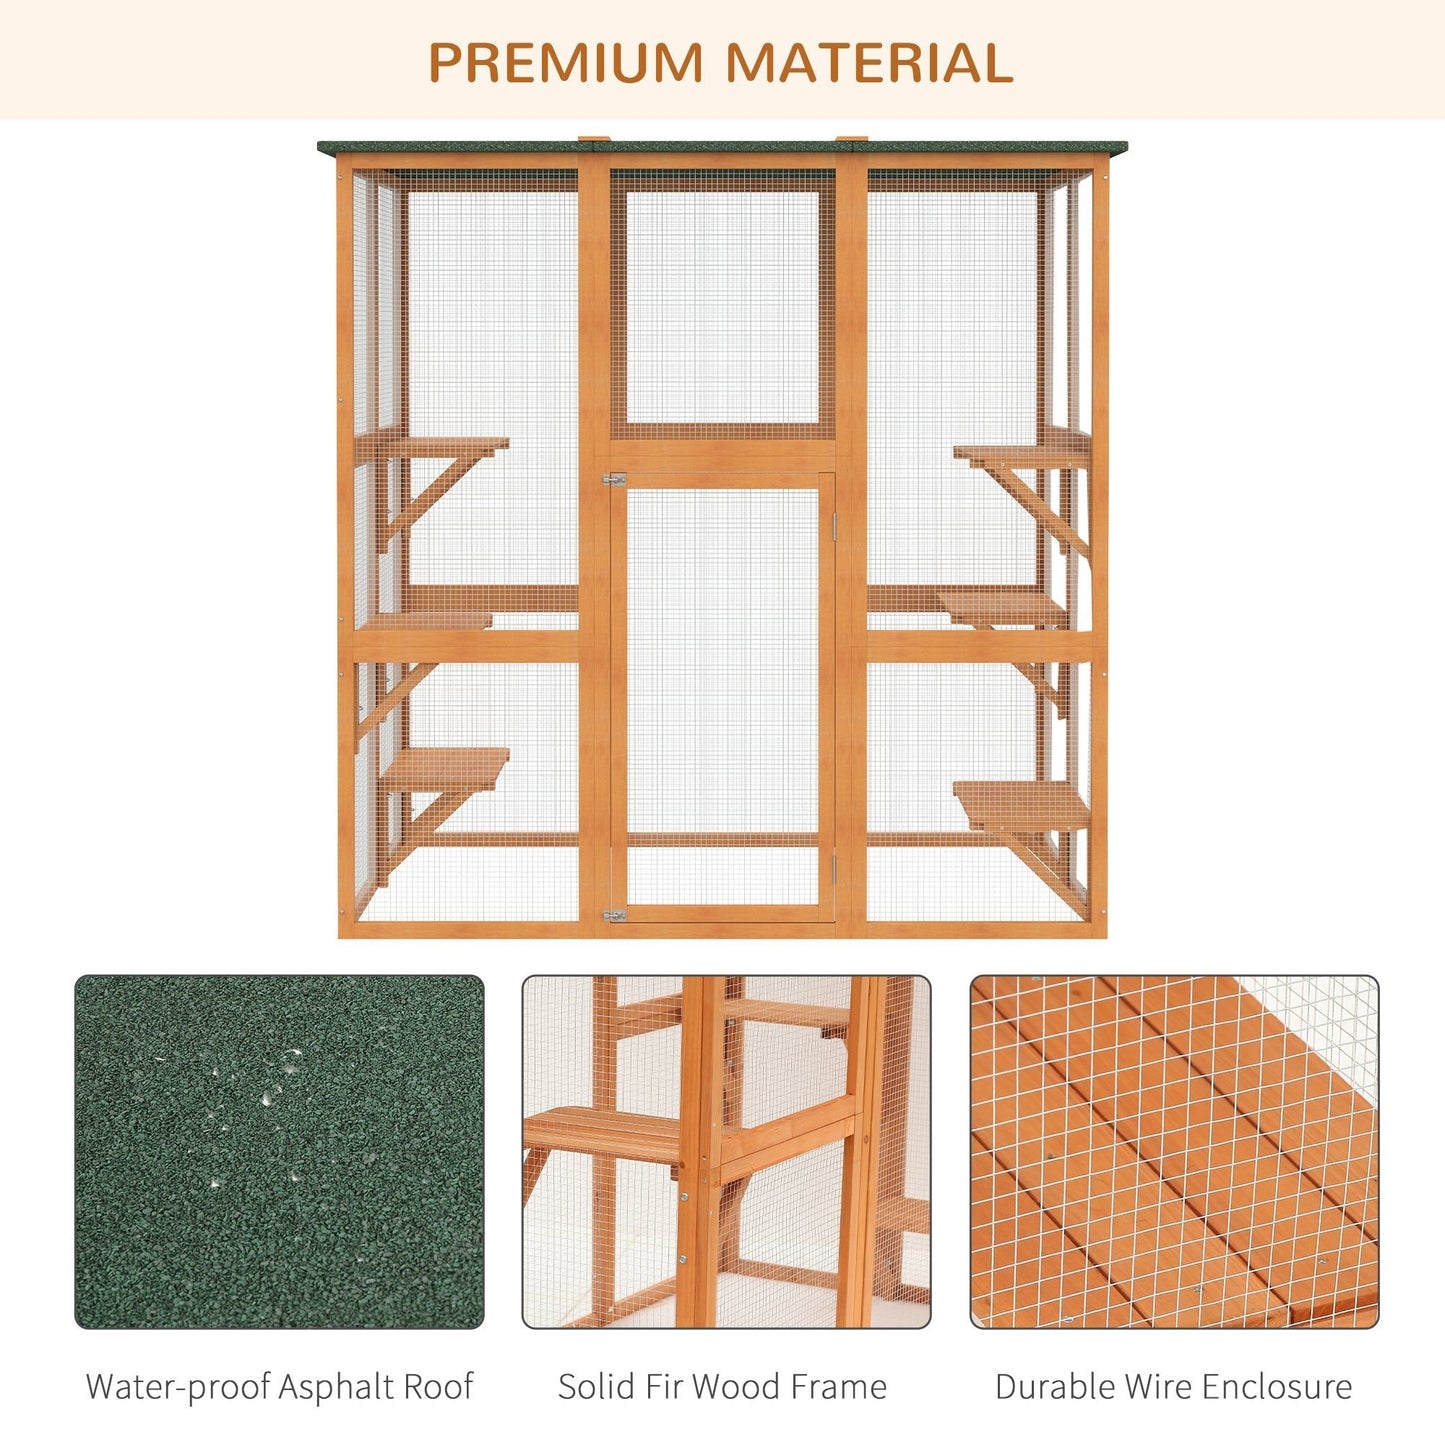 Large Outdoor Catio Enclosure, Weatherproof Cat House with Asphalt Roof, Wooden Cat Patio Cage with 6 Balanced Platforms, 71" x 39" x 71", Orange at Gallery Canada